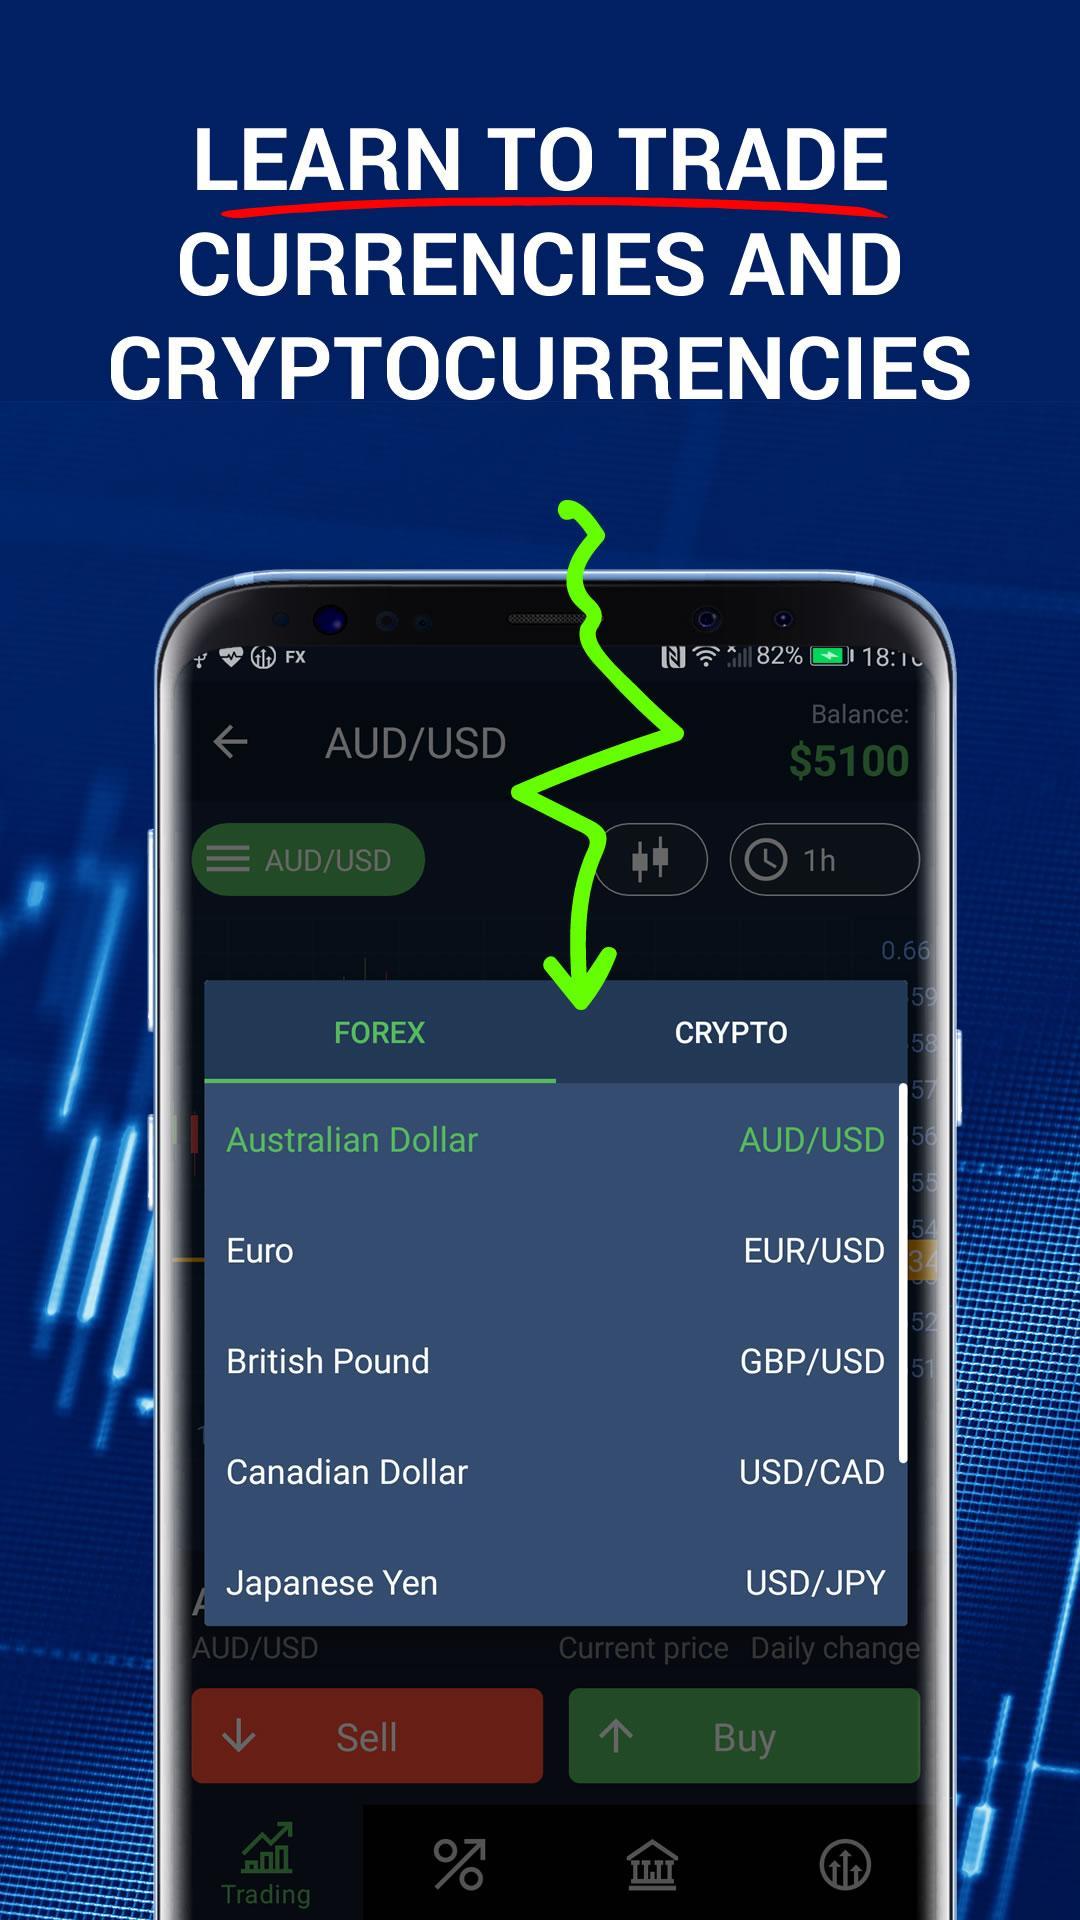 Forex training, Forex trading simulator for Android - APK ...